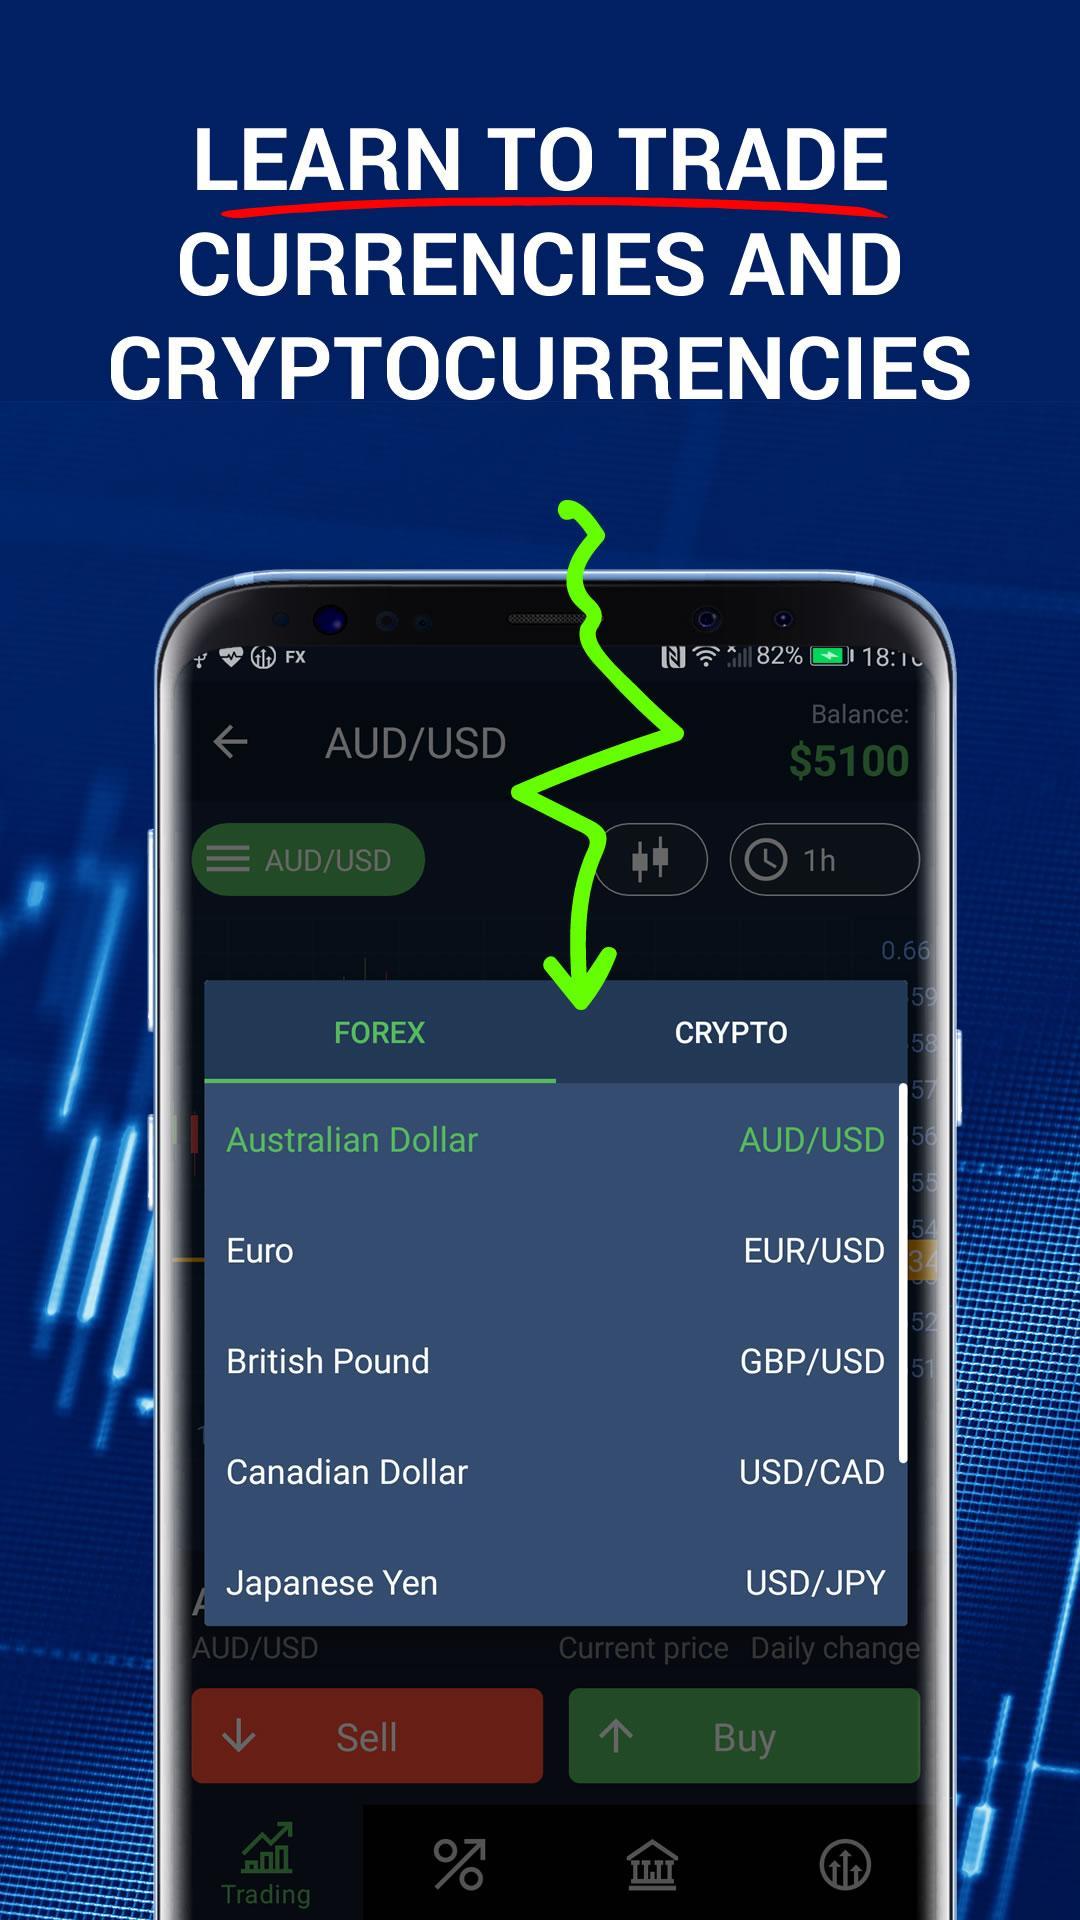 Forex training, Forex trading simulator for Android - APK ...